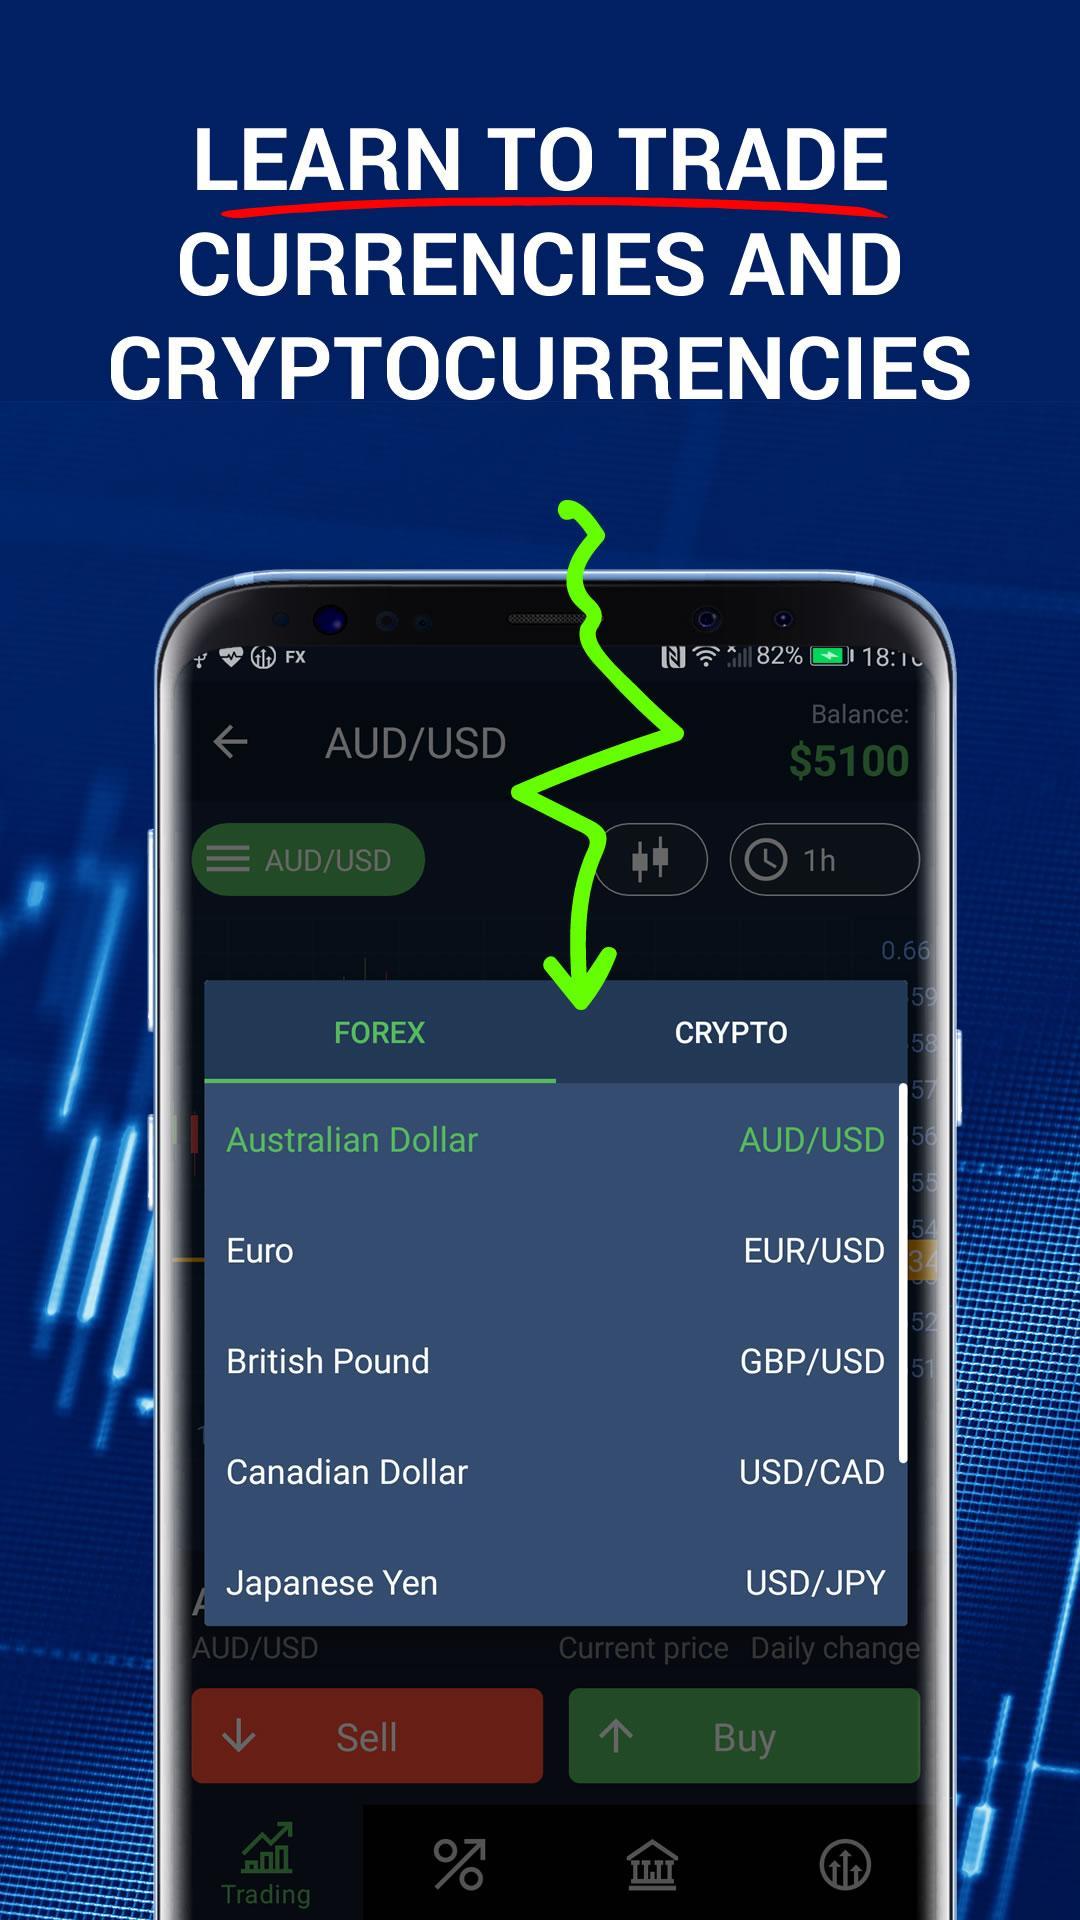 Forex training, Forex trading simulator for Android - APK ...